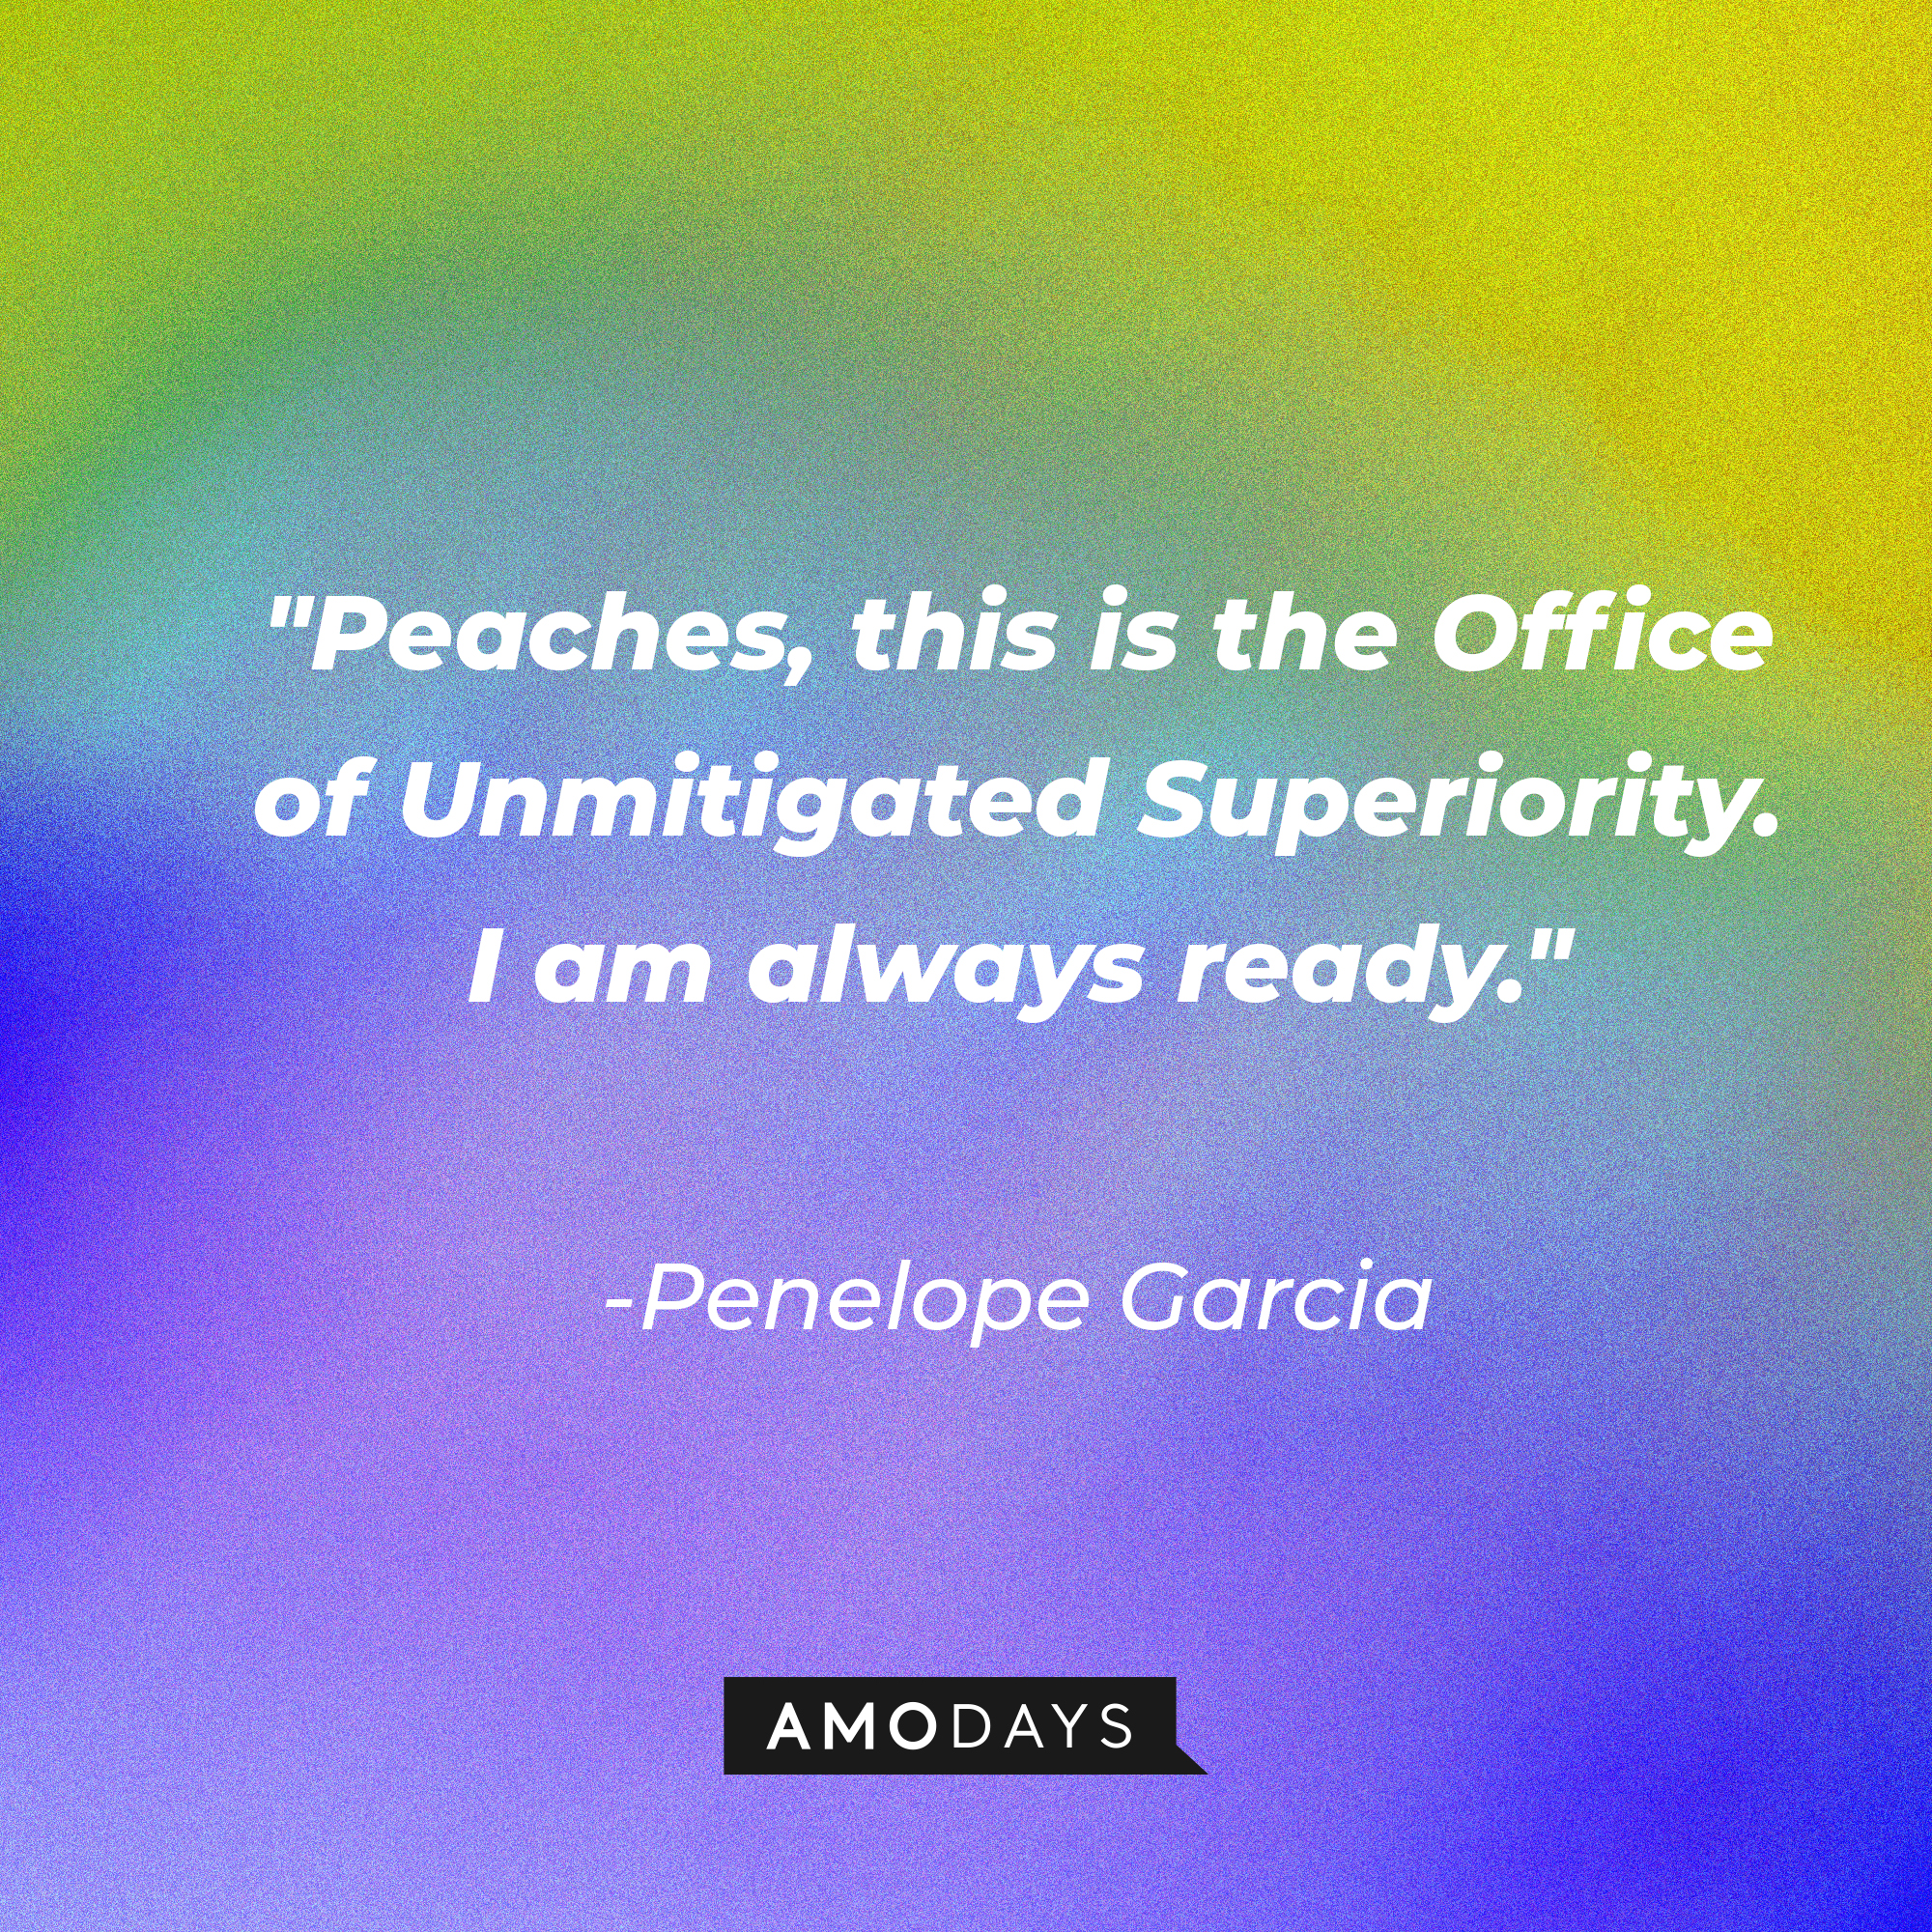 Penelope Garcia's quote: "Peaches, this is the Office of Unmitigated Superiority. I am always ready." | Source: AmoDays